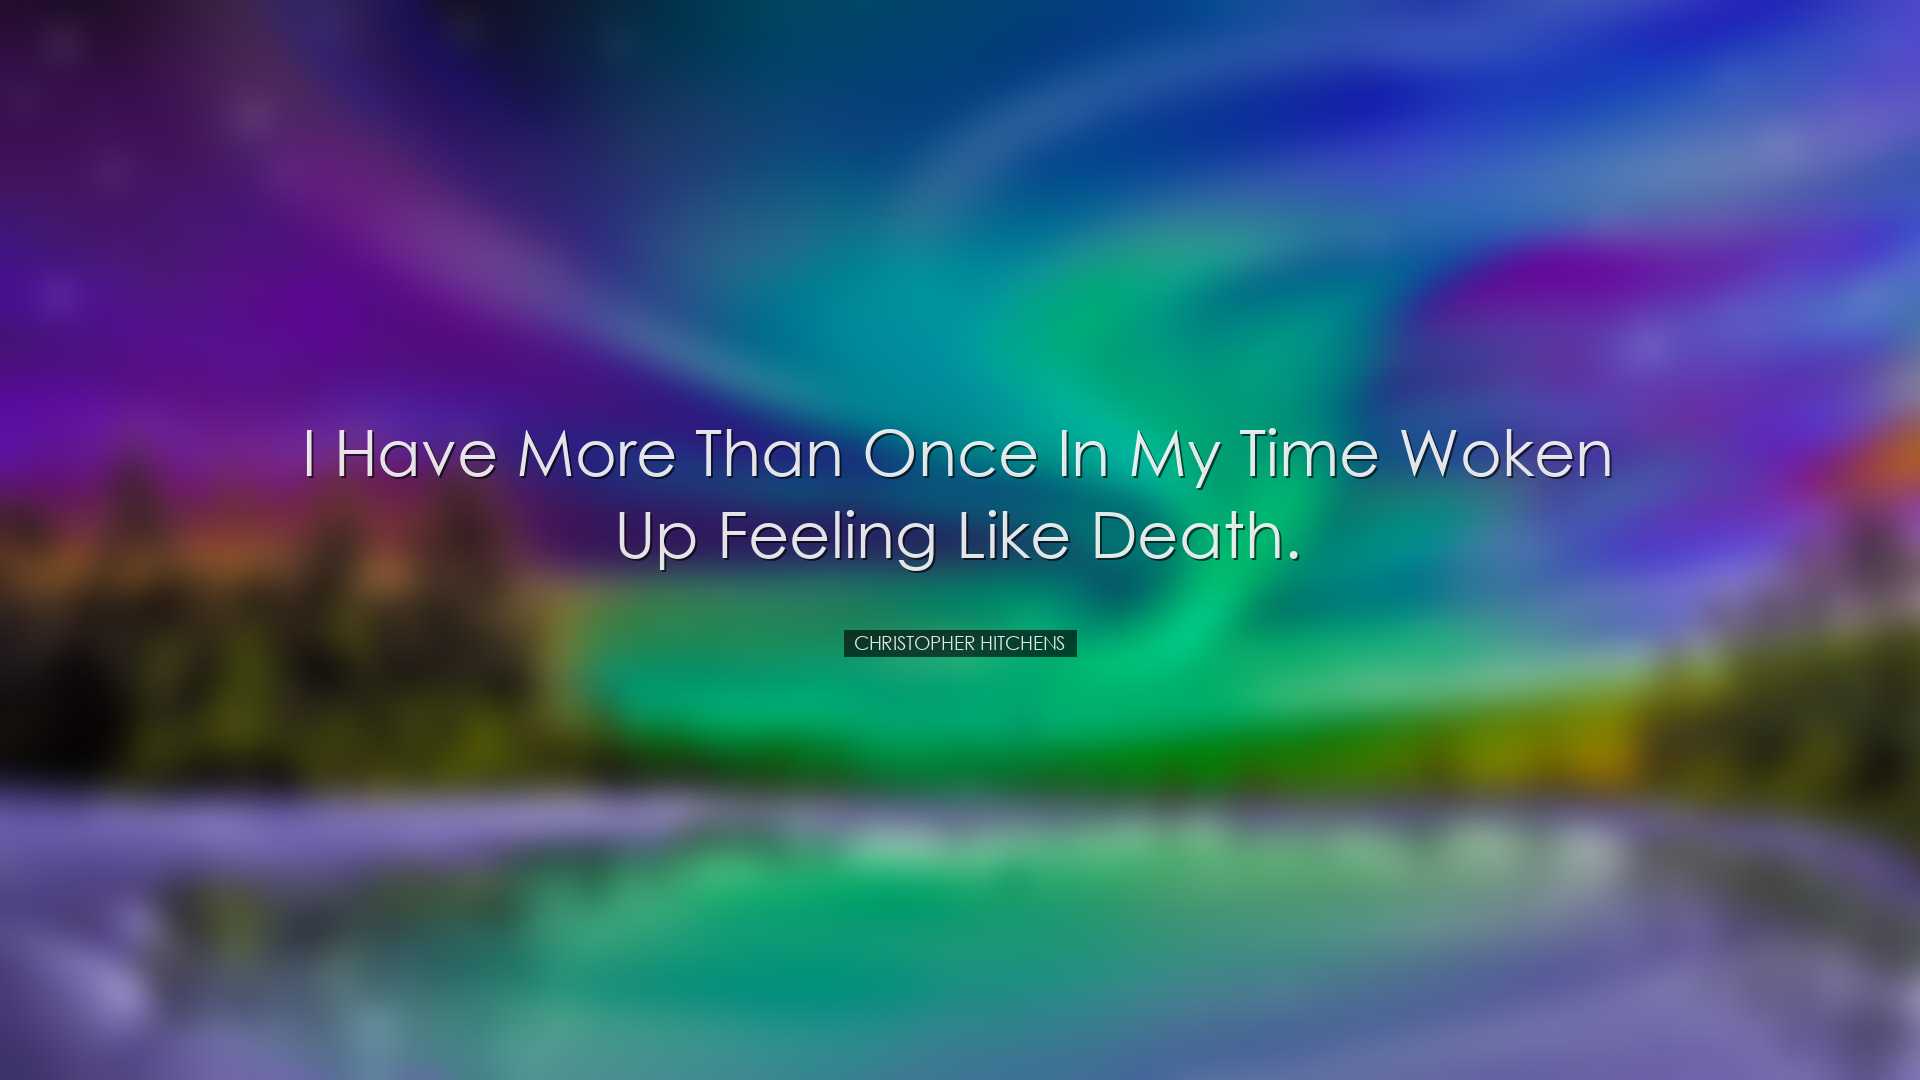 I have more than once in my time woken up feeling like death. - Ch